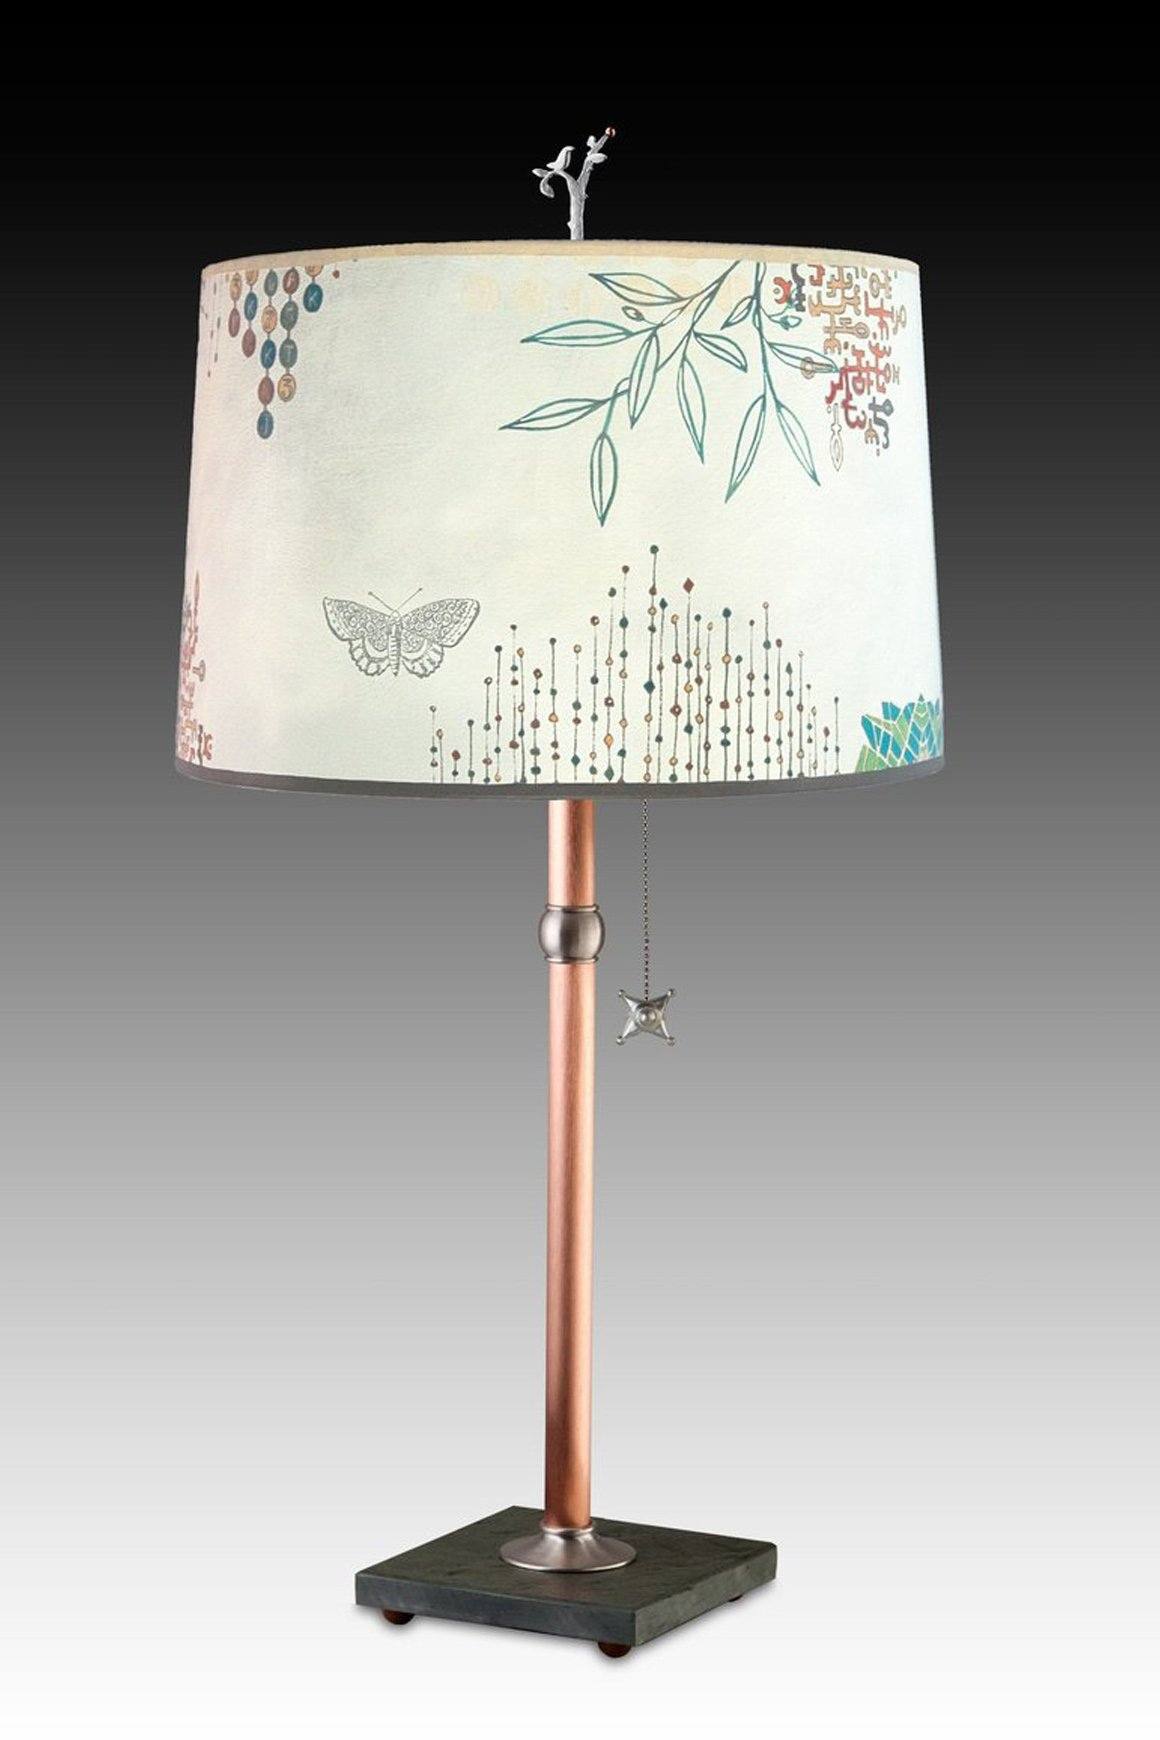 Janna Ugone & Co Table Lamps Copper Table Lamp with Large Drum Shade in Ecru Journey